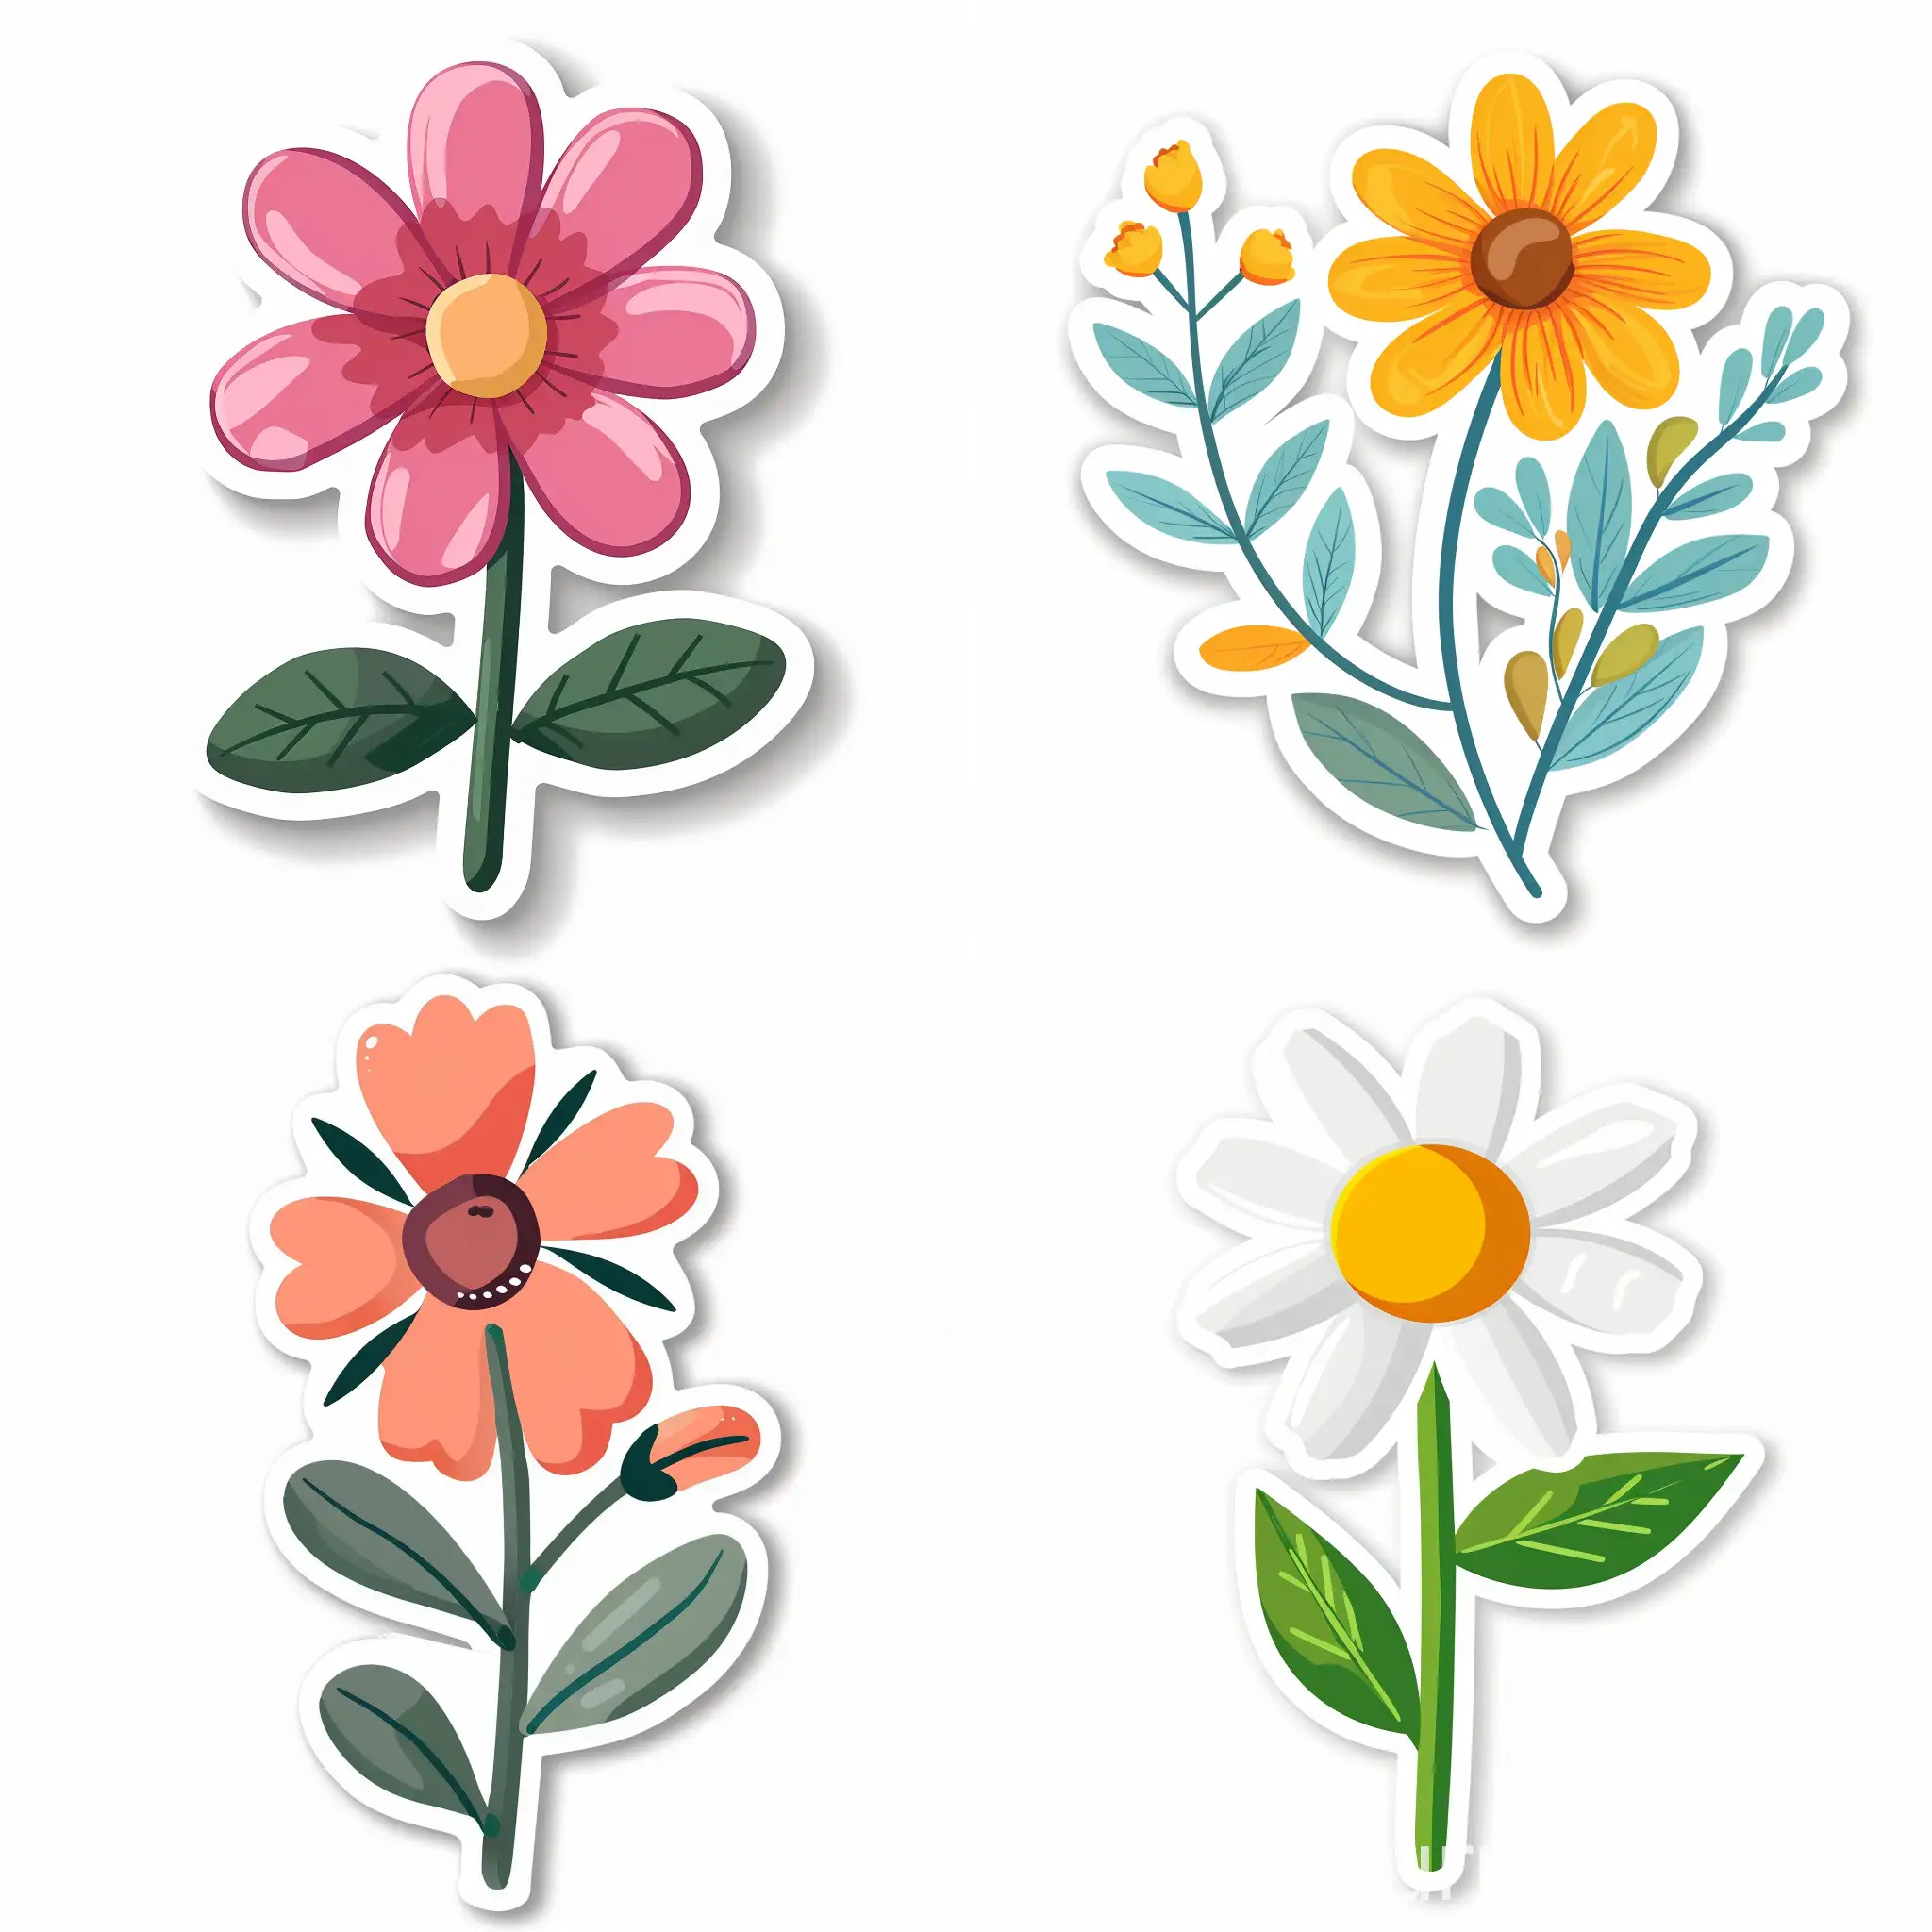 sticker design of simple single flower, in flat style, high quality details